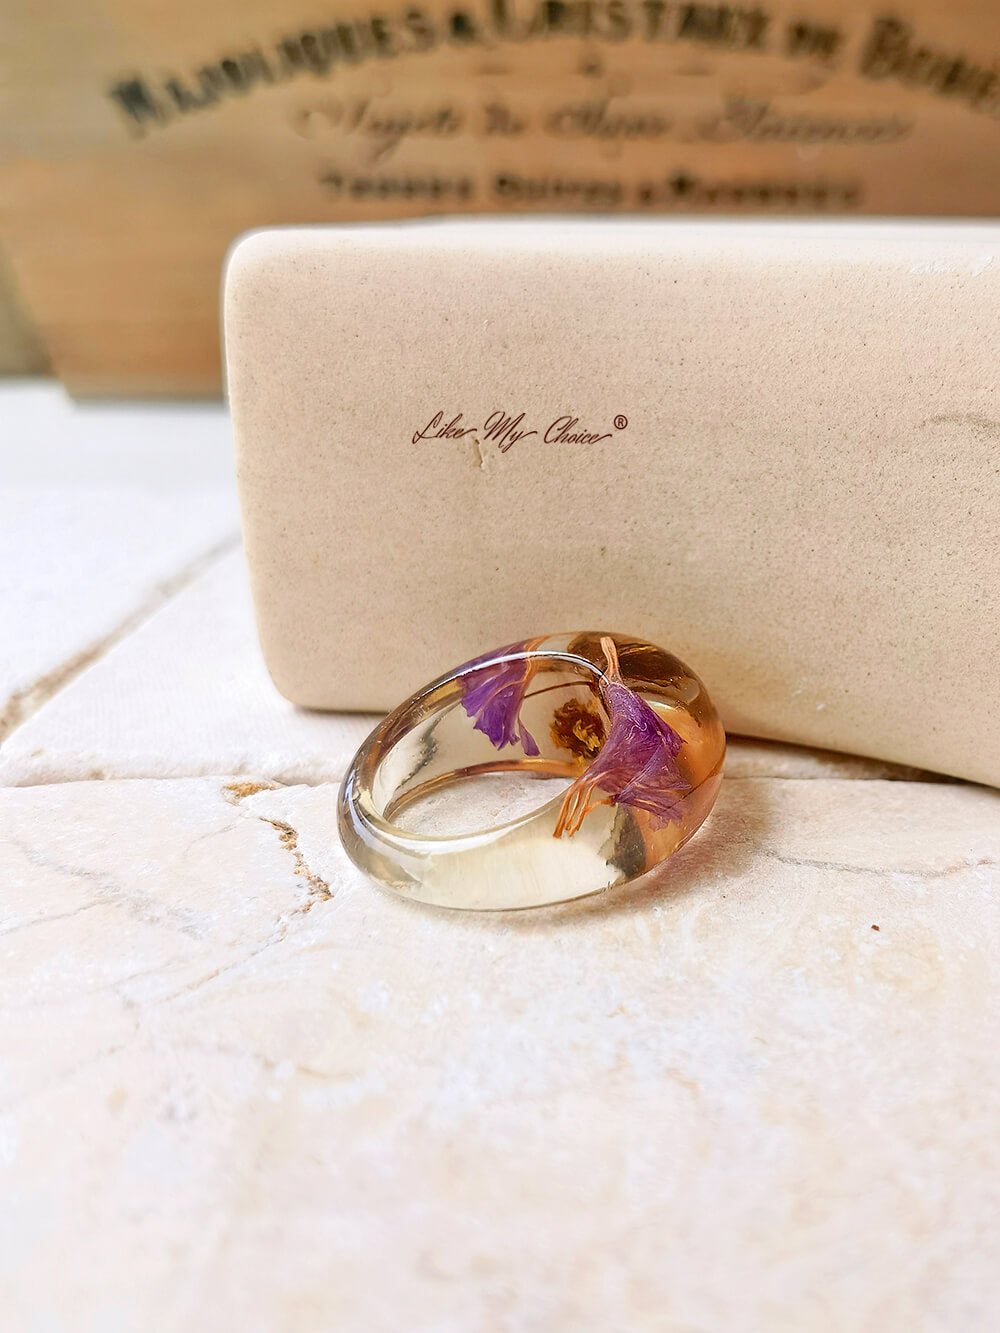 Dried flower resin ring with purple flowers